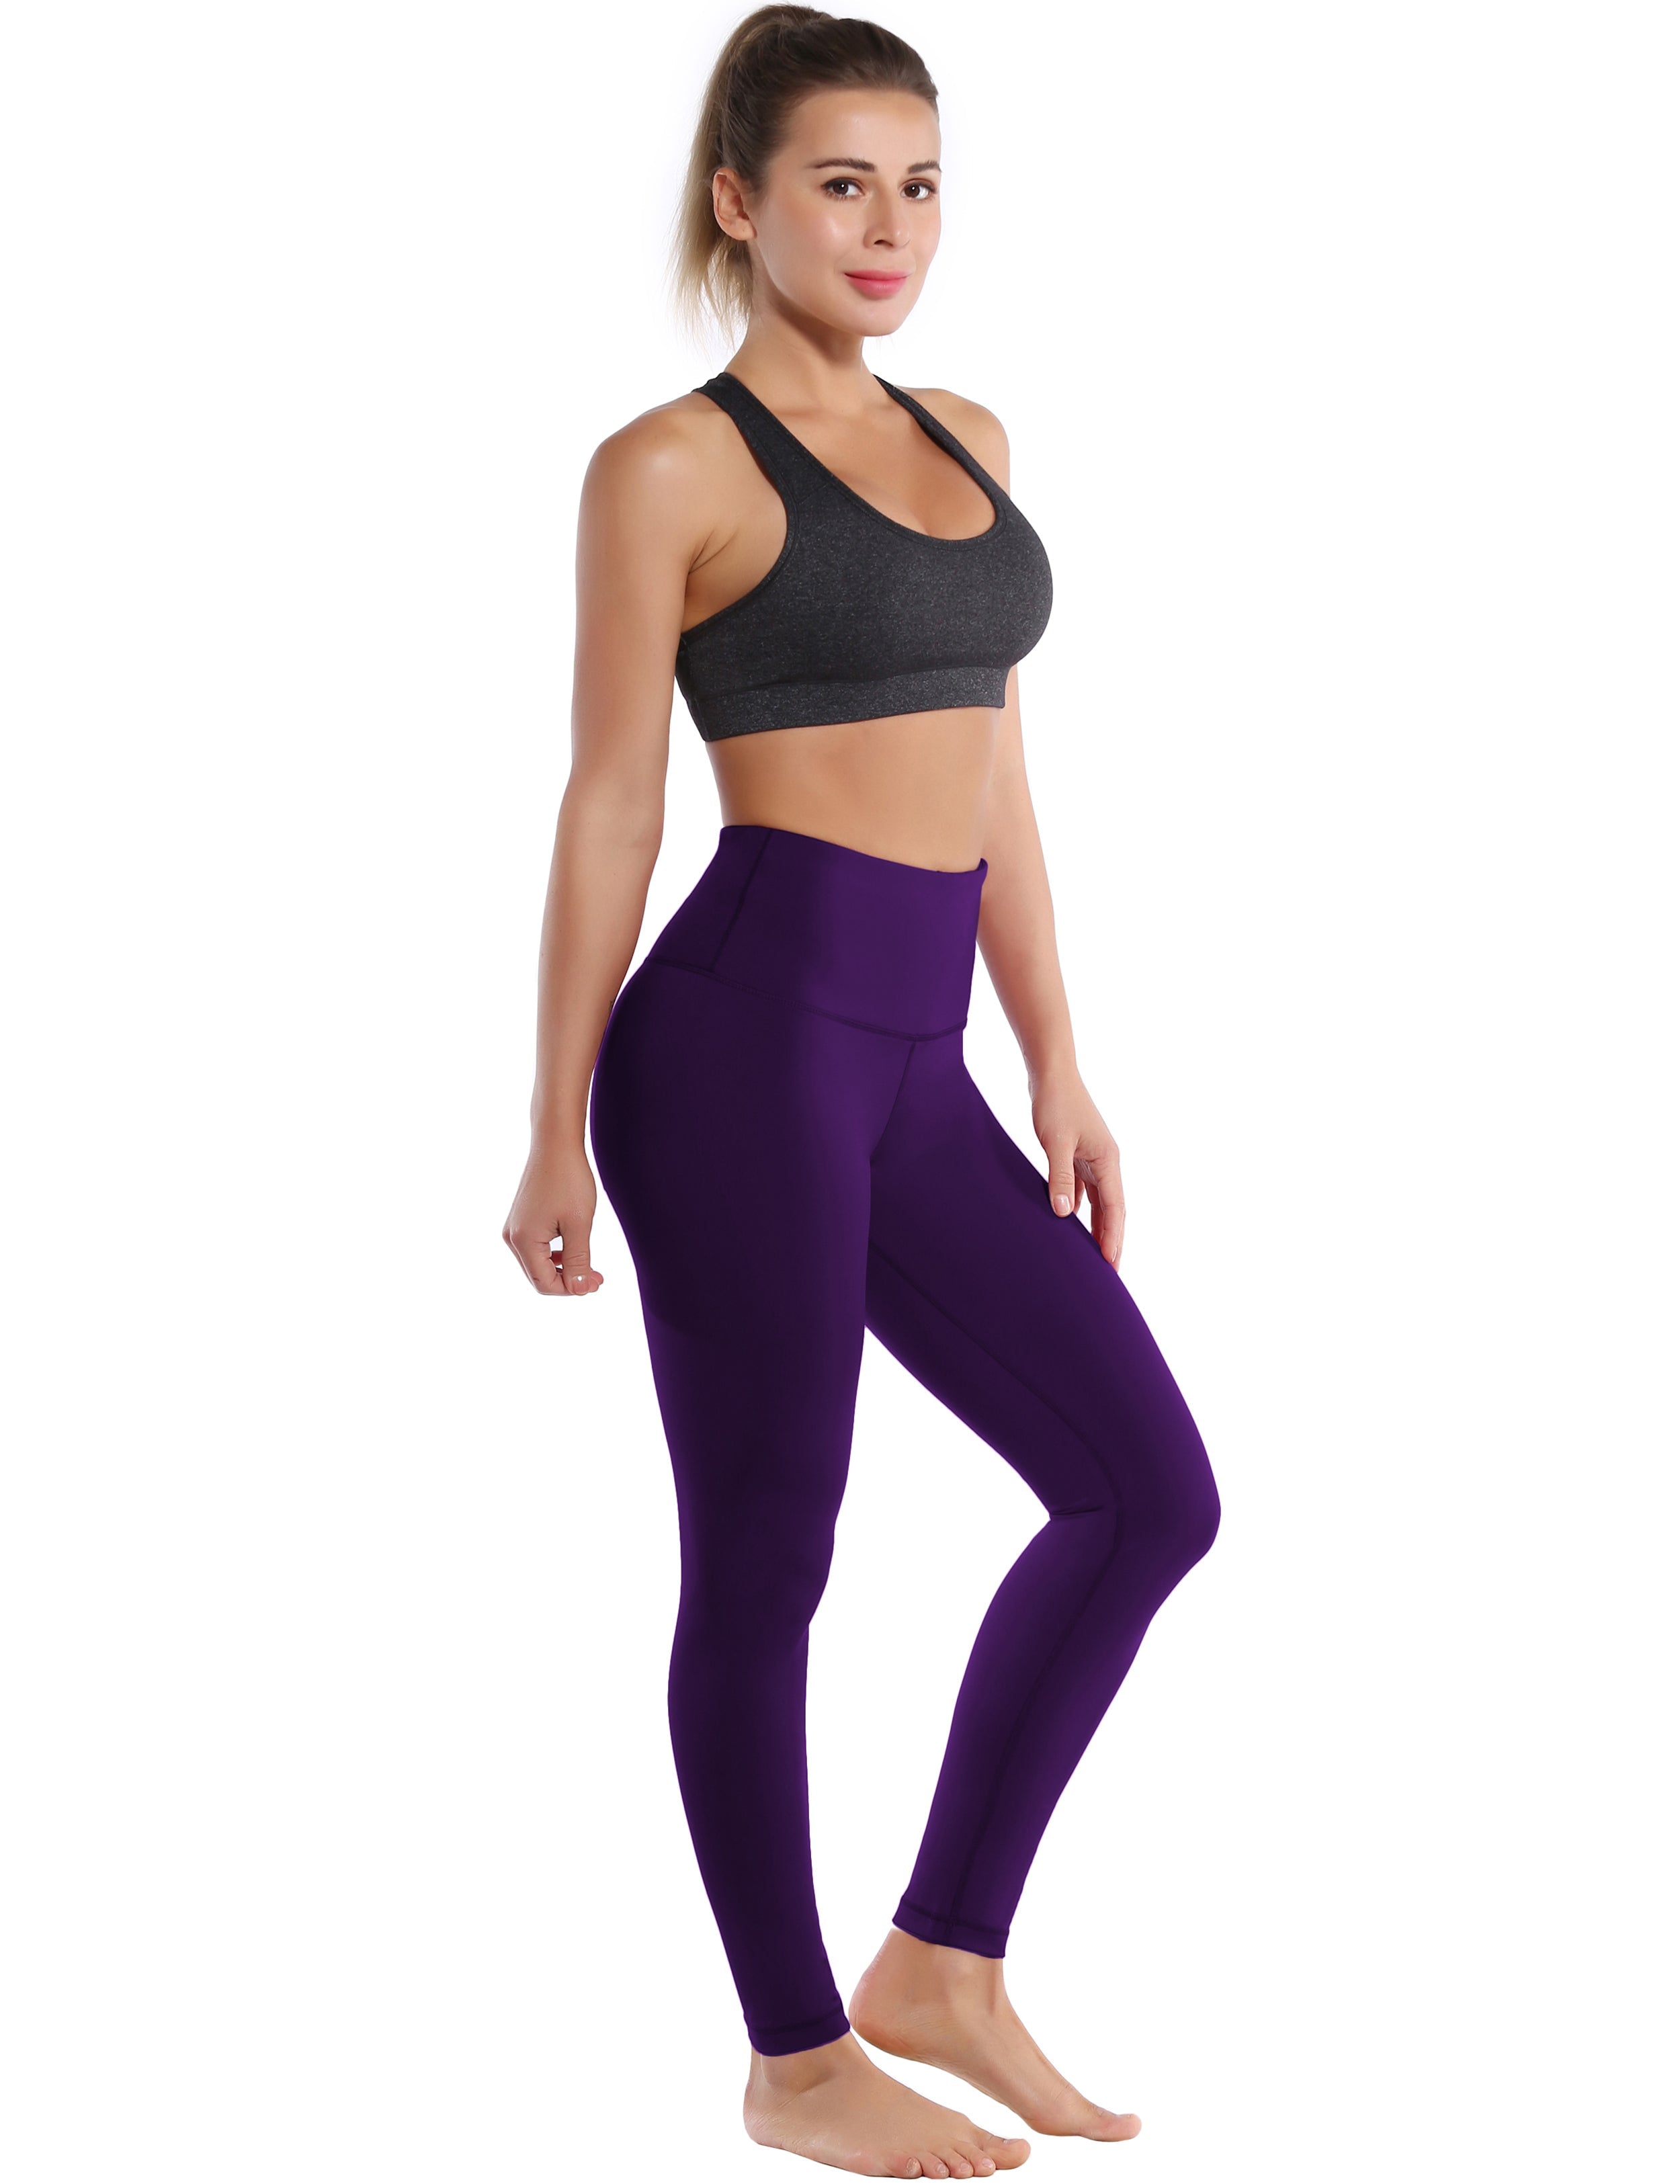 High Waist Golf Pants eggplantpurple 75%Nylon/25%Spandex Fabric doesn't attract lint easily 4-way stretch No see-through Moisture-wicking Tummy control Inner pocket Four lengths